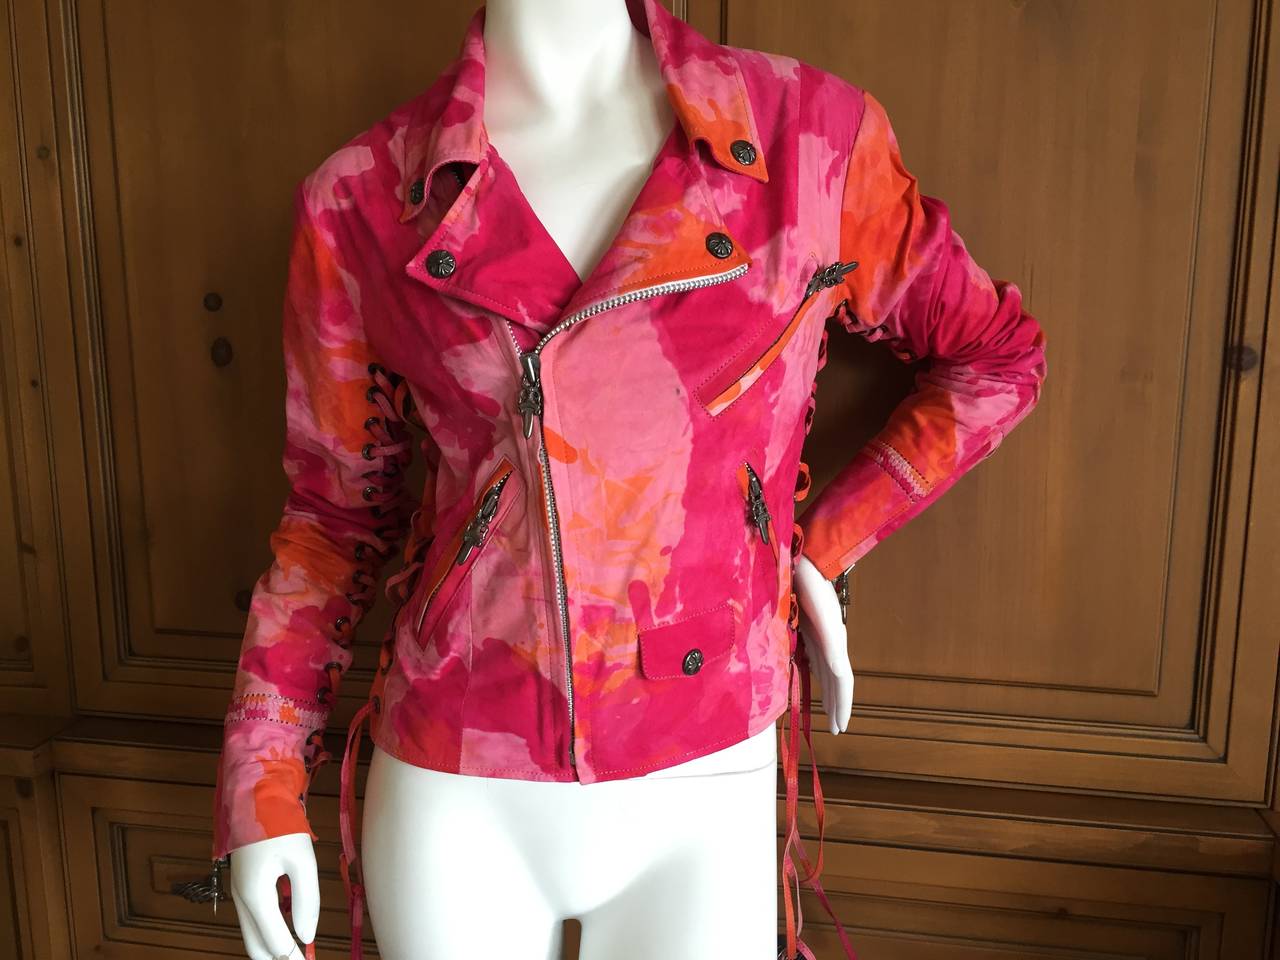 Chrome Hearts Tie Dye Suede Moto Jacket. Techno Color pink, orange and lilac tie dye.
This is a custom made jacket and is really special. Corset lacing up the sleeve and at the sides.
All the hardware is Sterling Silver, including all the grommet